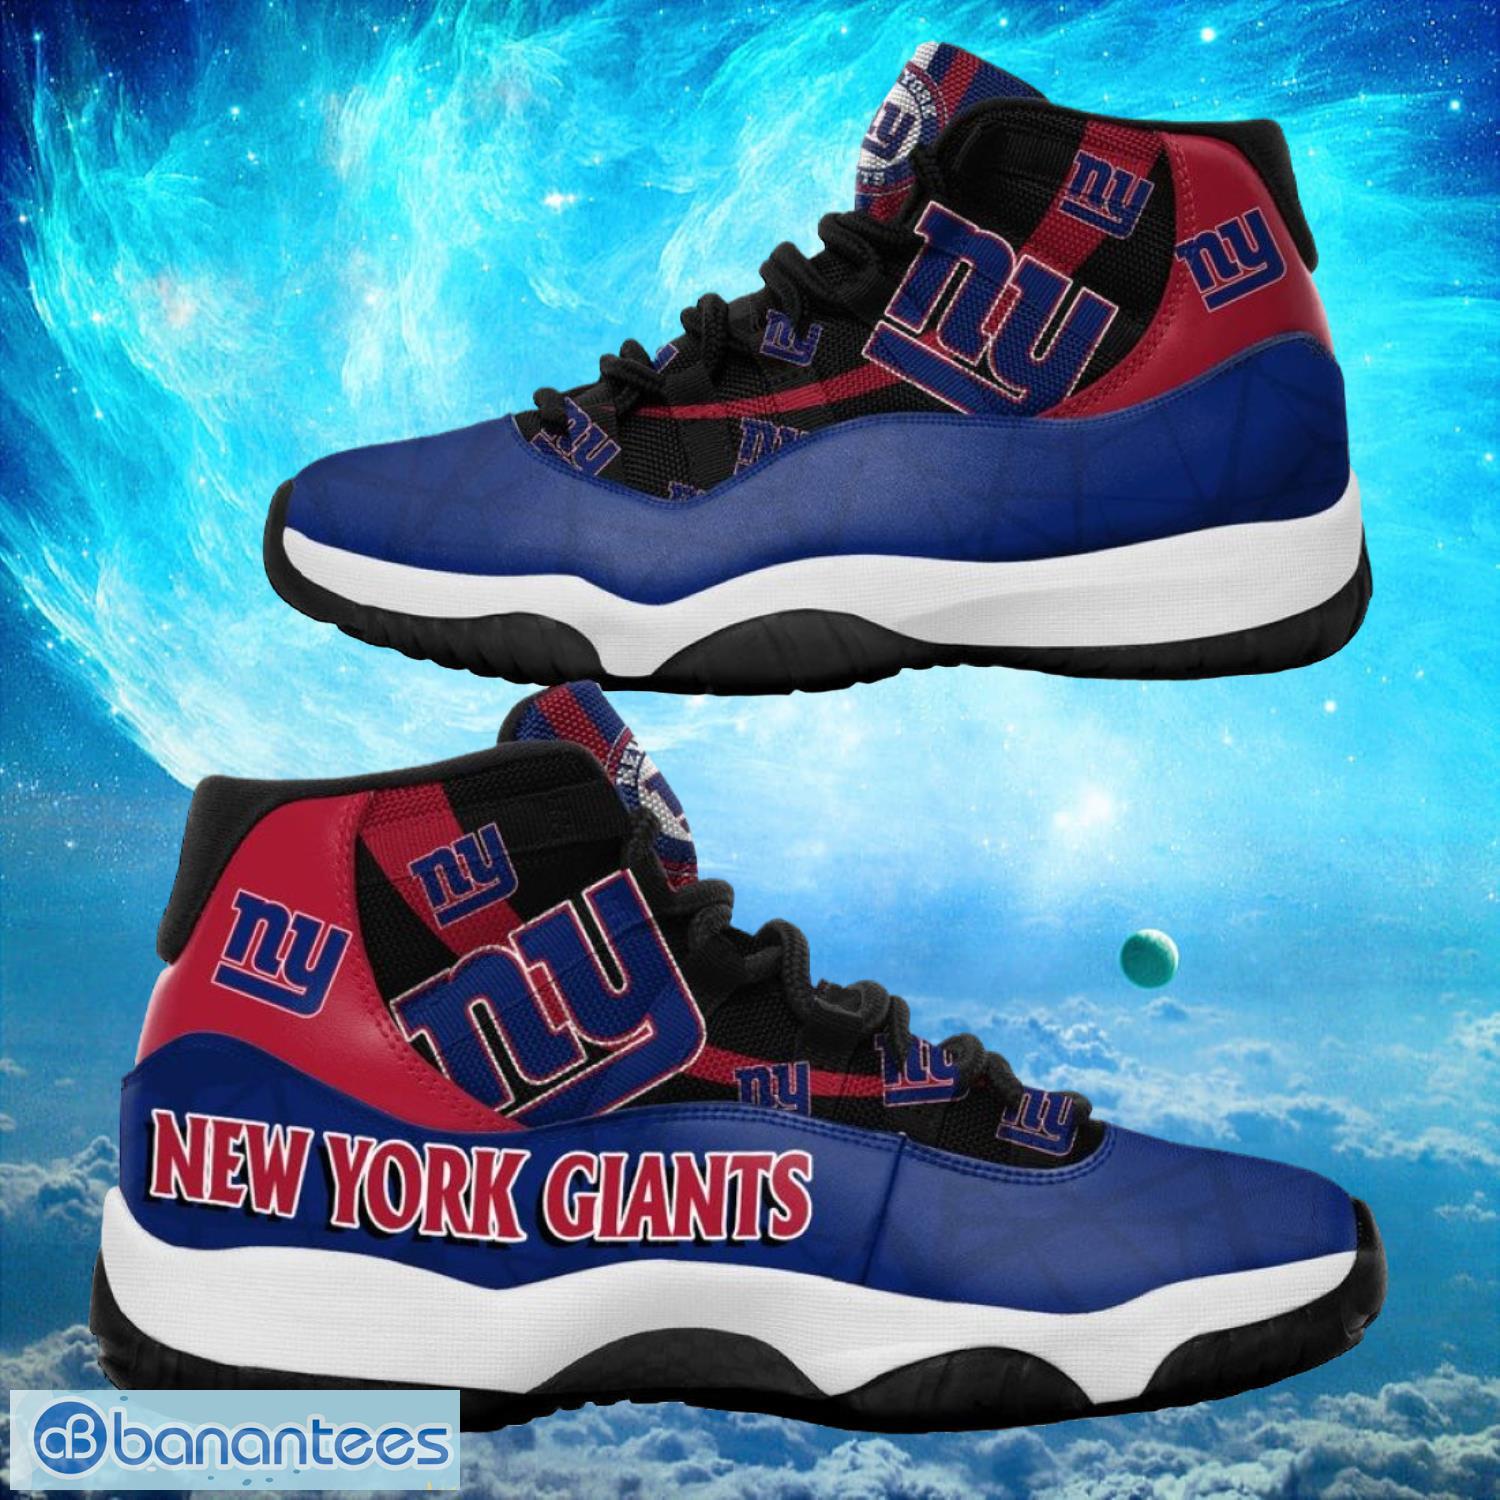 New York Giants NFL Air Jordan 11 Sneakers Shoes Gift For Fans Product Photo 1